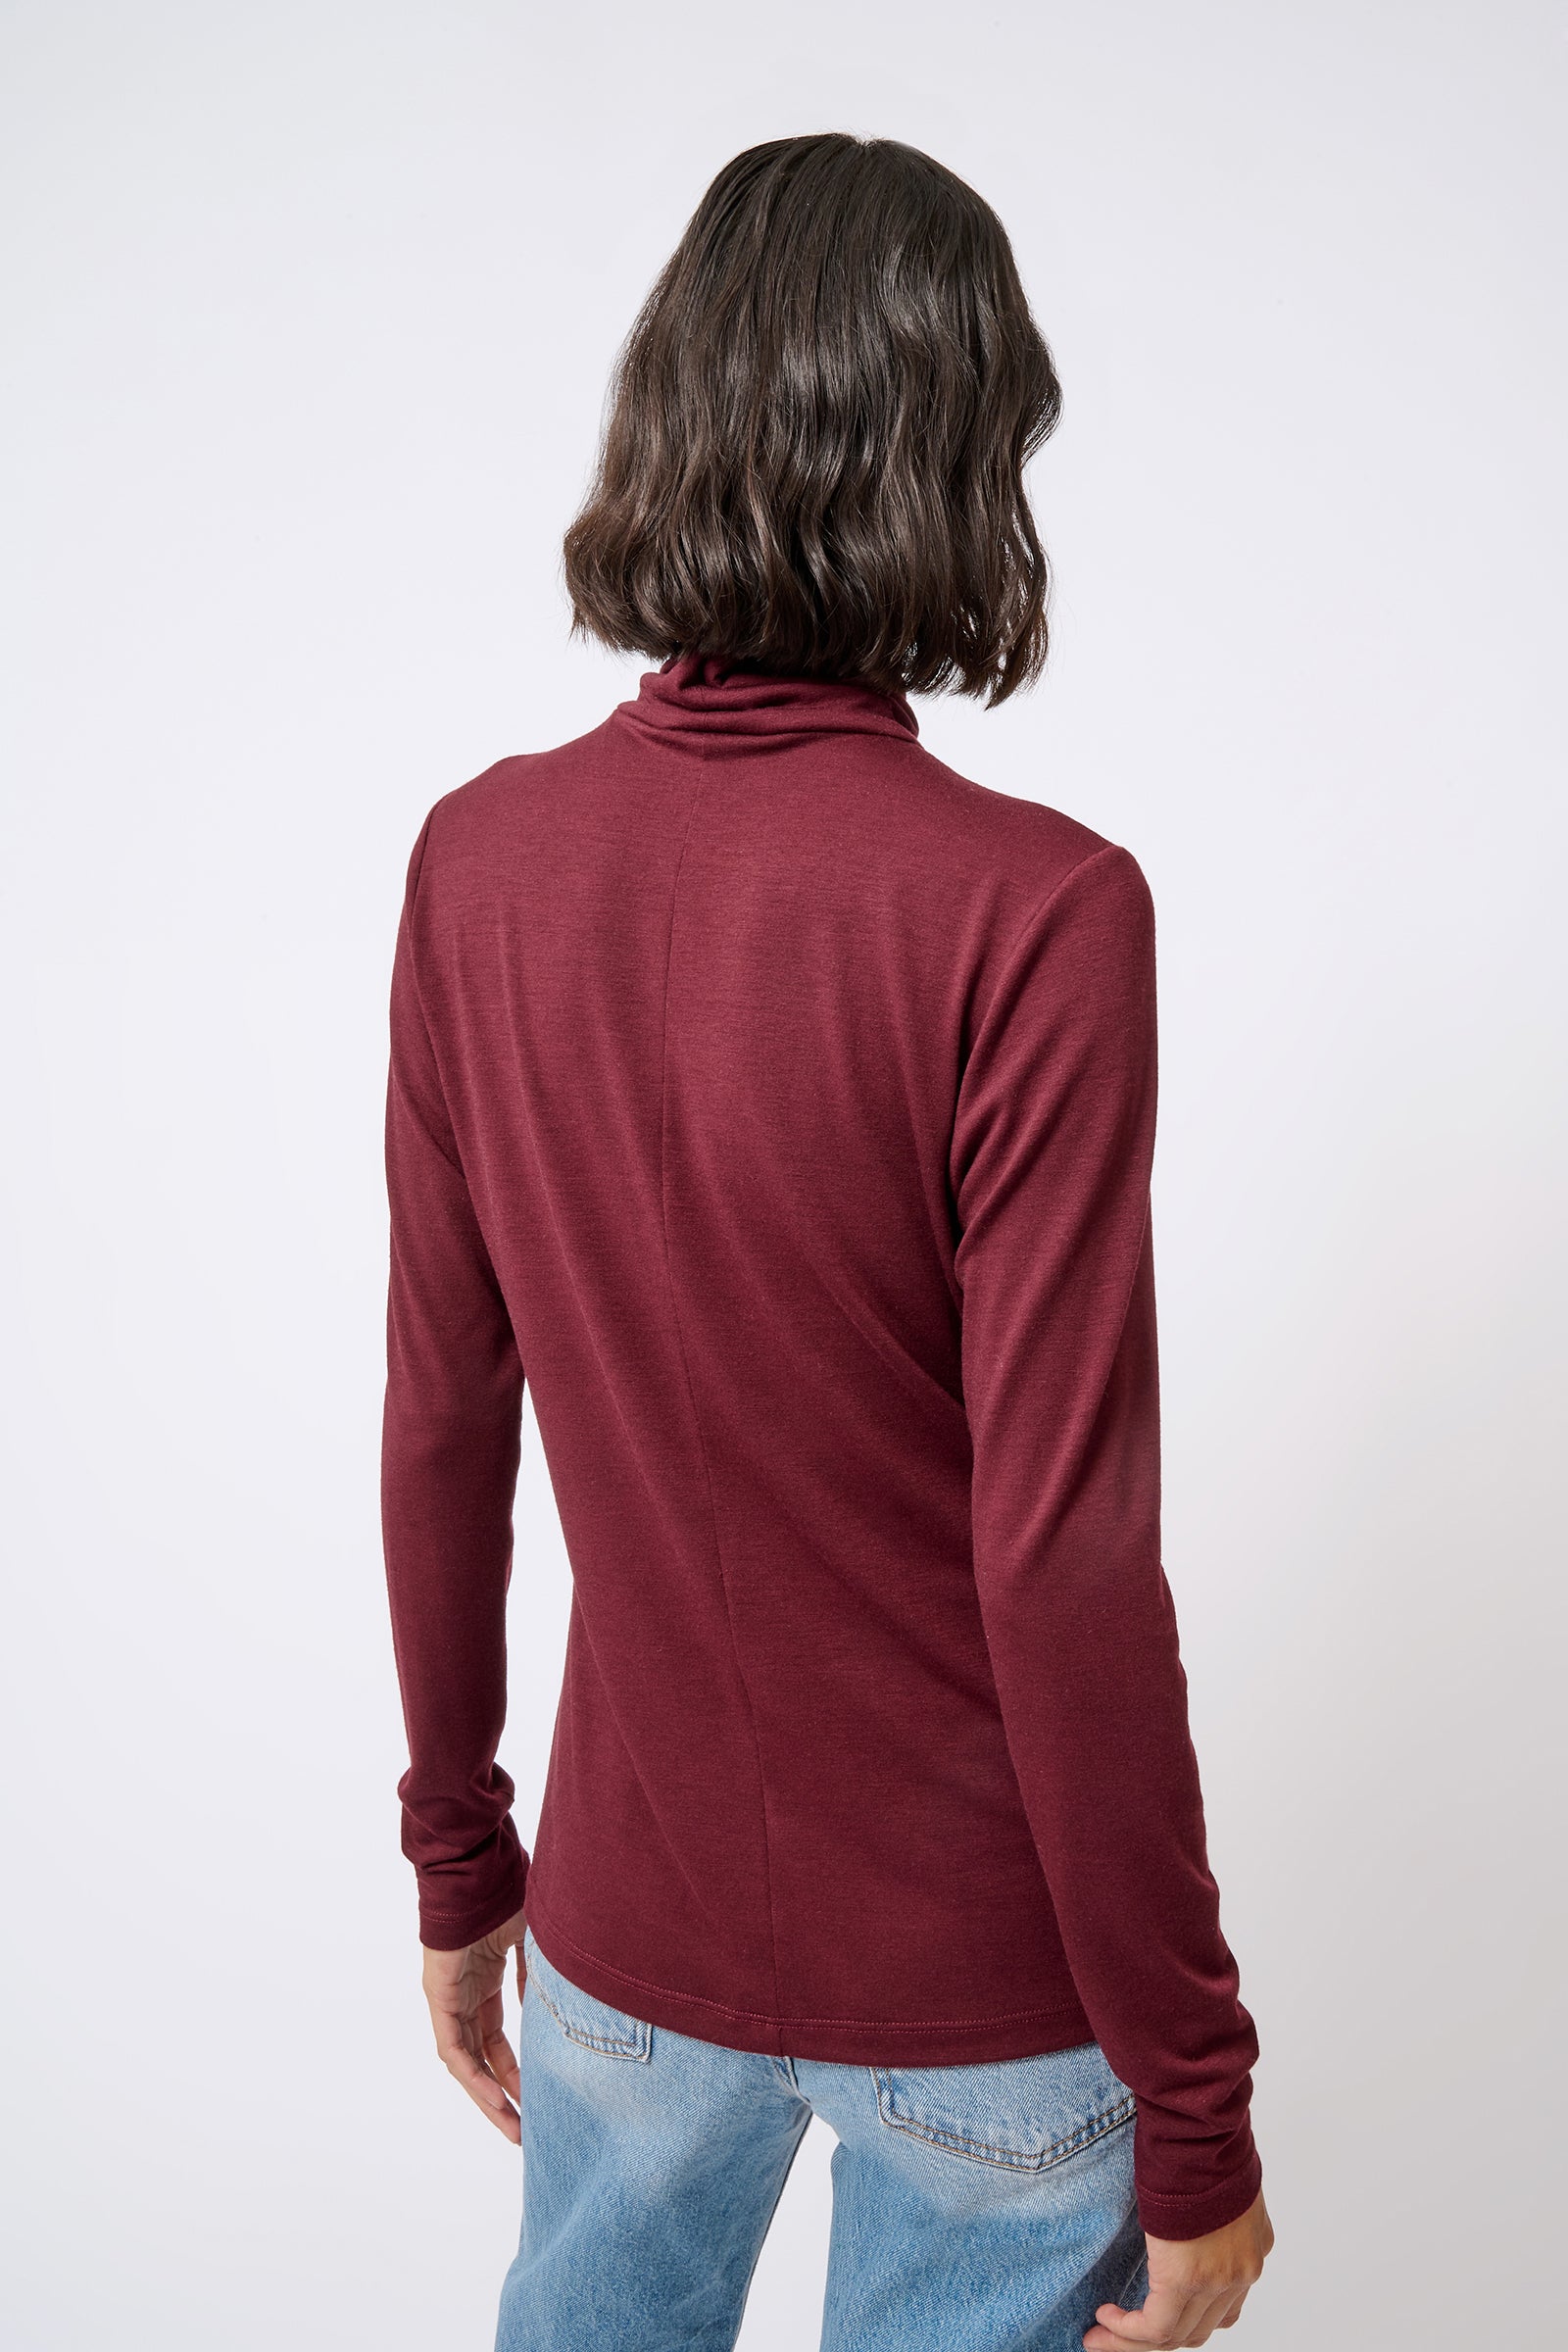 Kal Rieman Seamed Fitted Turtleneck in Wine Color on Model Back View